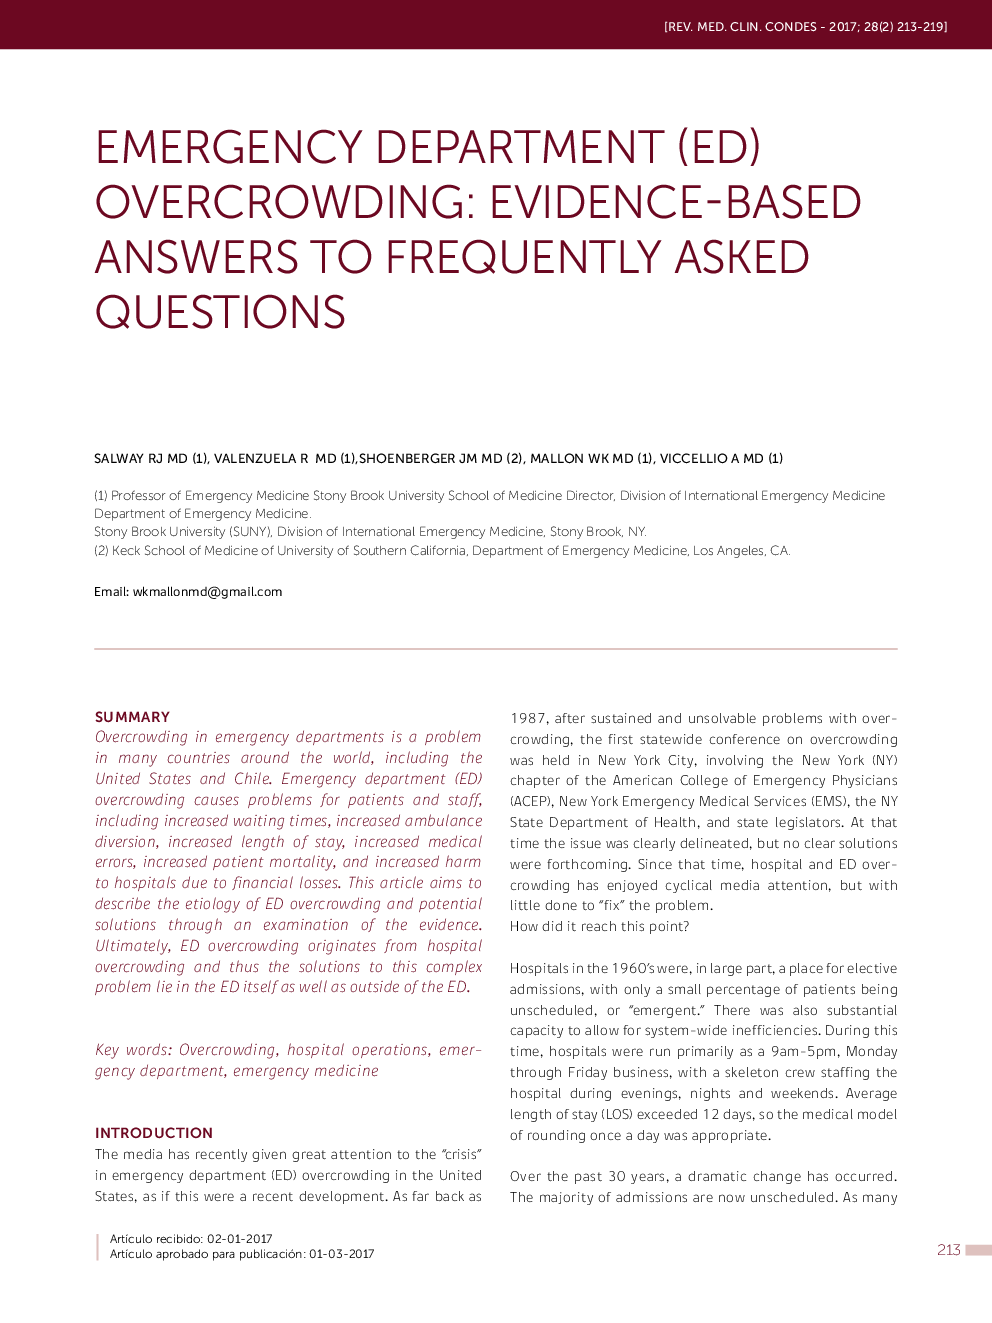 EMERGENCY DEPARTMENT (ED) OVERCROWDING: EVIDENCE-BASED ANSWERS TO FREQUENTLY ASKED QUESTIONS